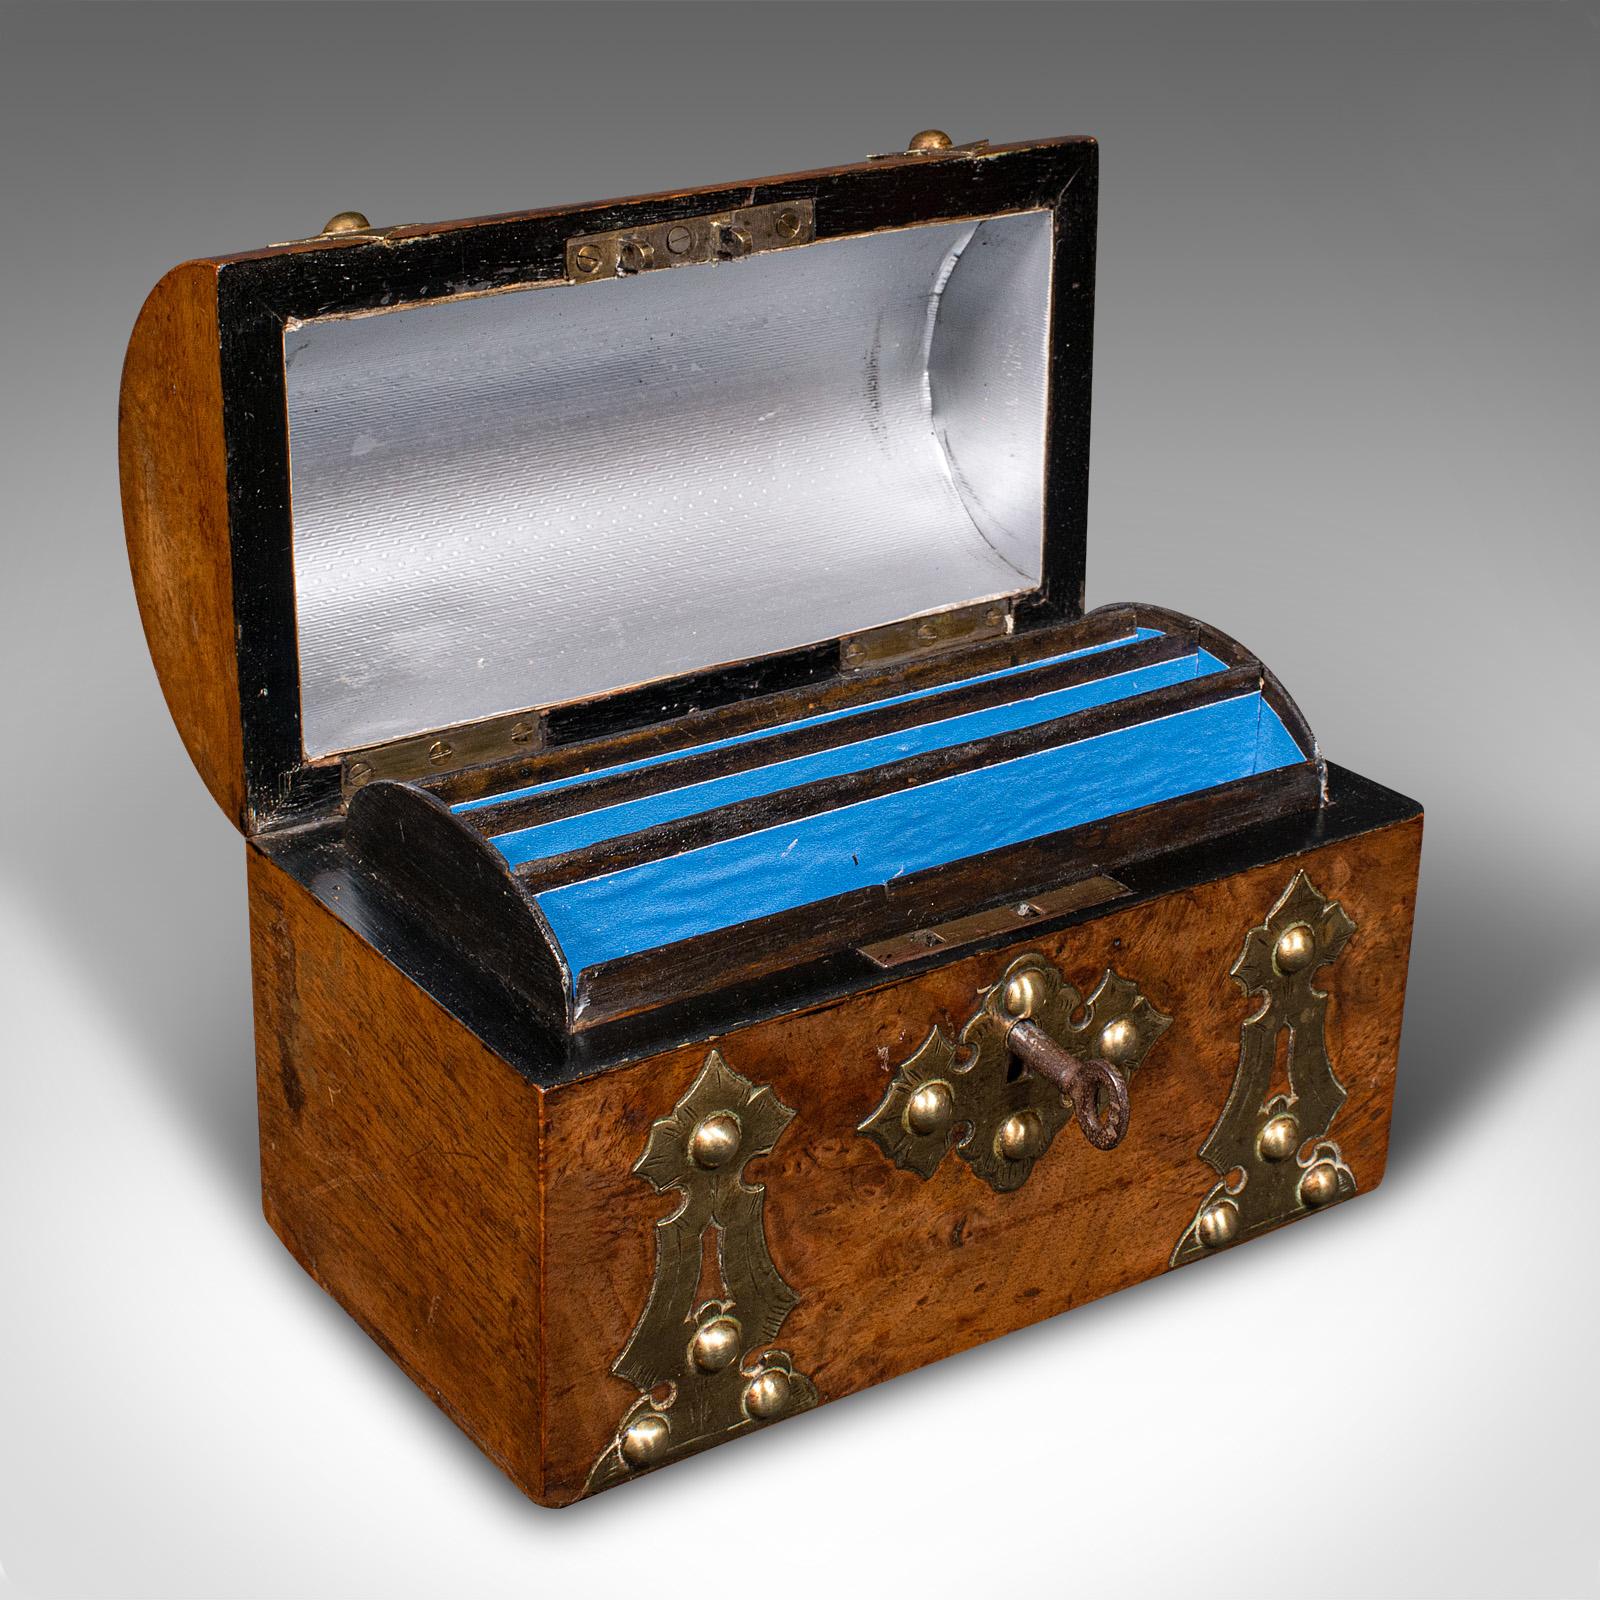 This is an antique dome top calling card box. An English, walnut and brass bound desktop tidy, dating to the early Victorian period, circa 1850.
 
Bold form and delightful brightwork to this neat stationery box
Displays a desirable aged patina